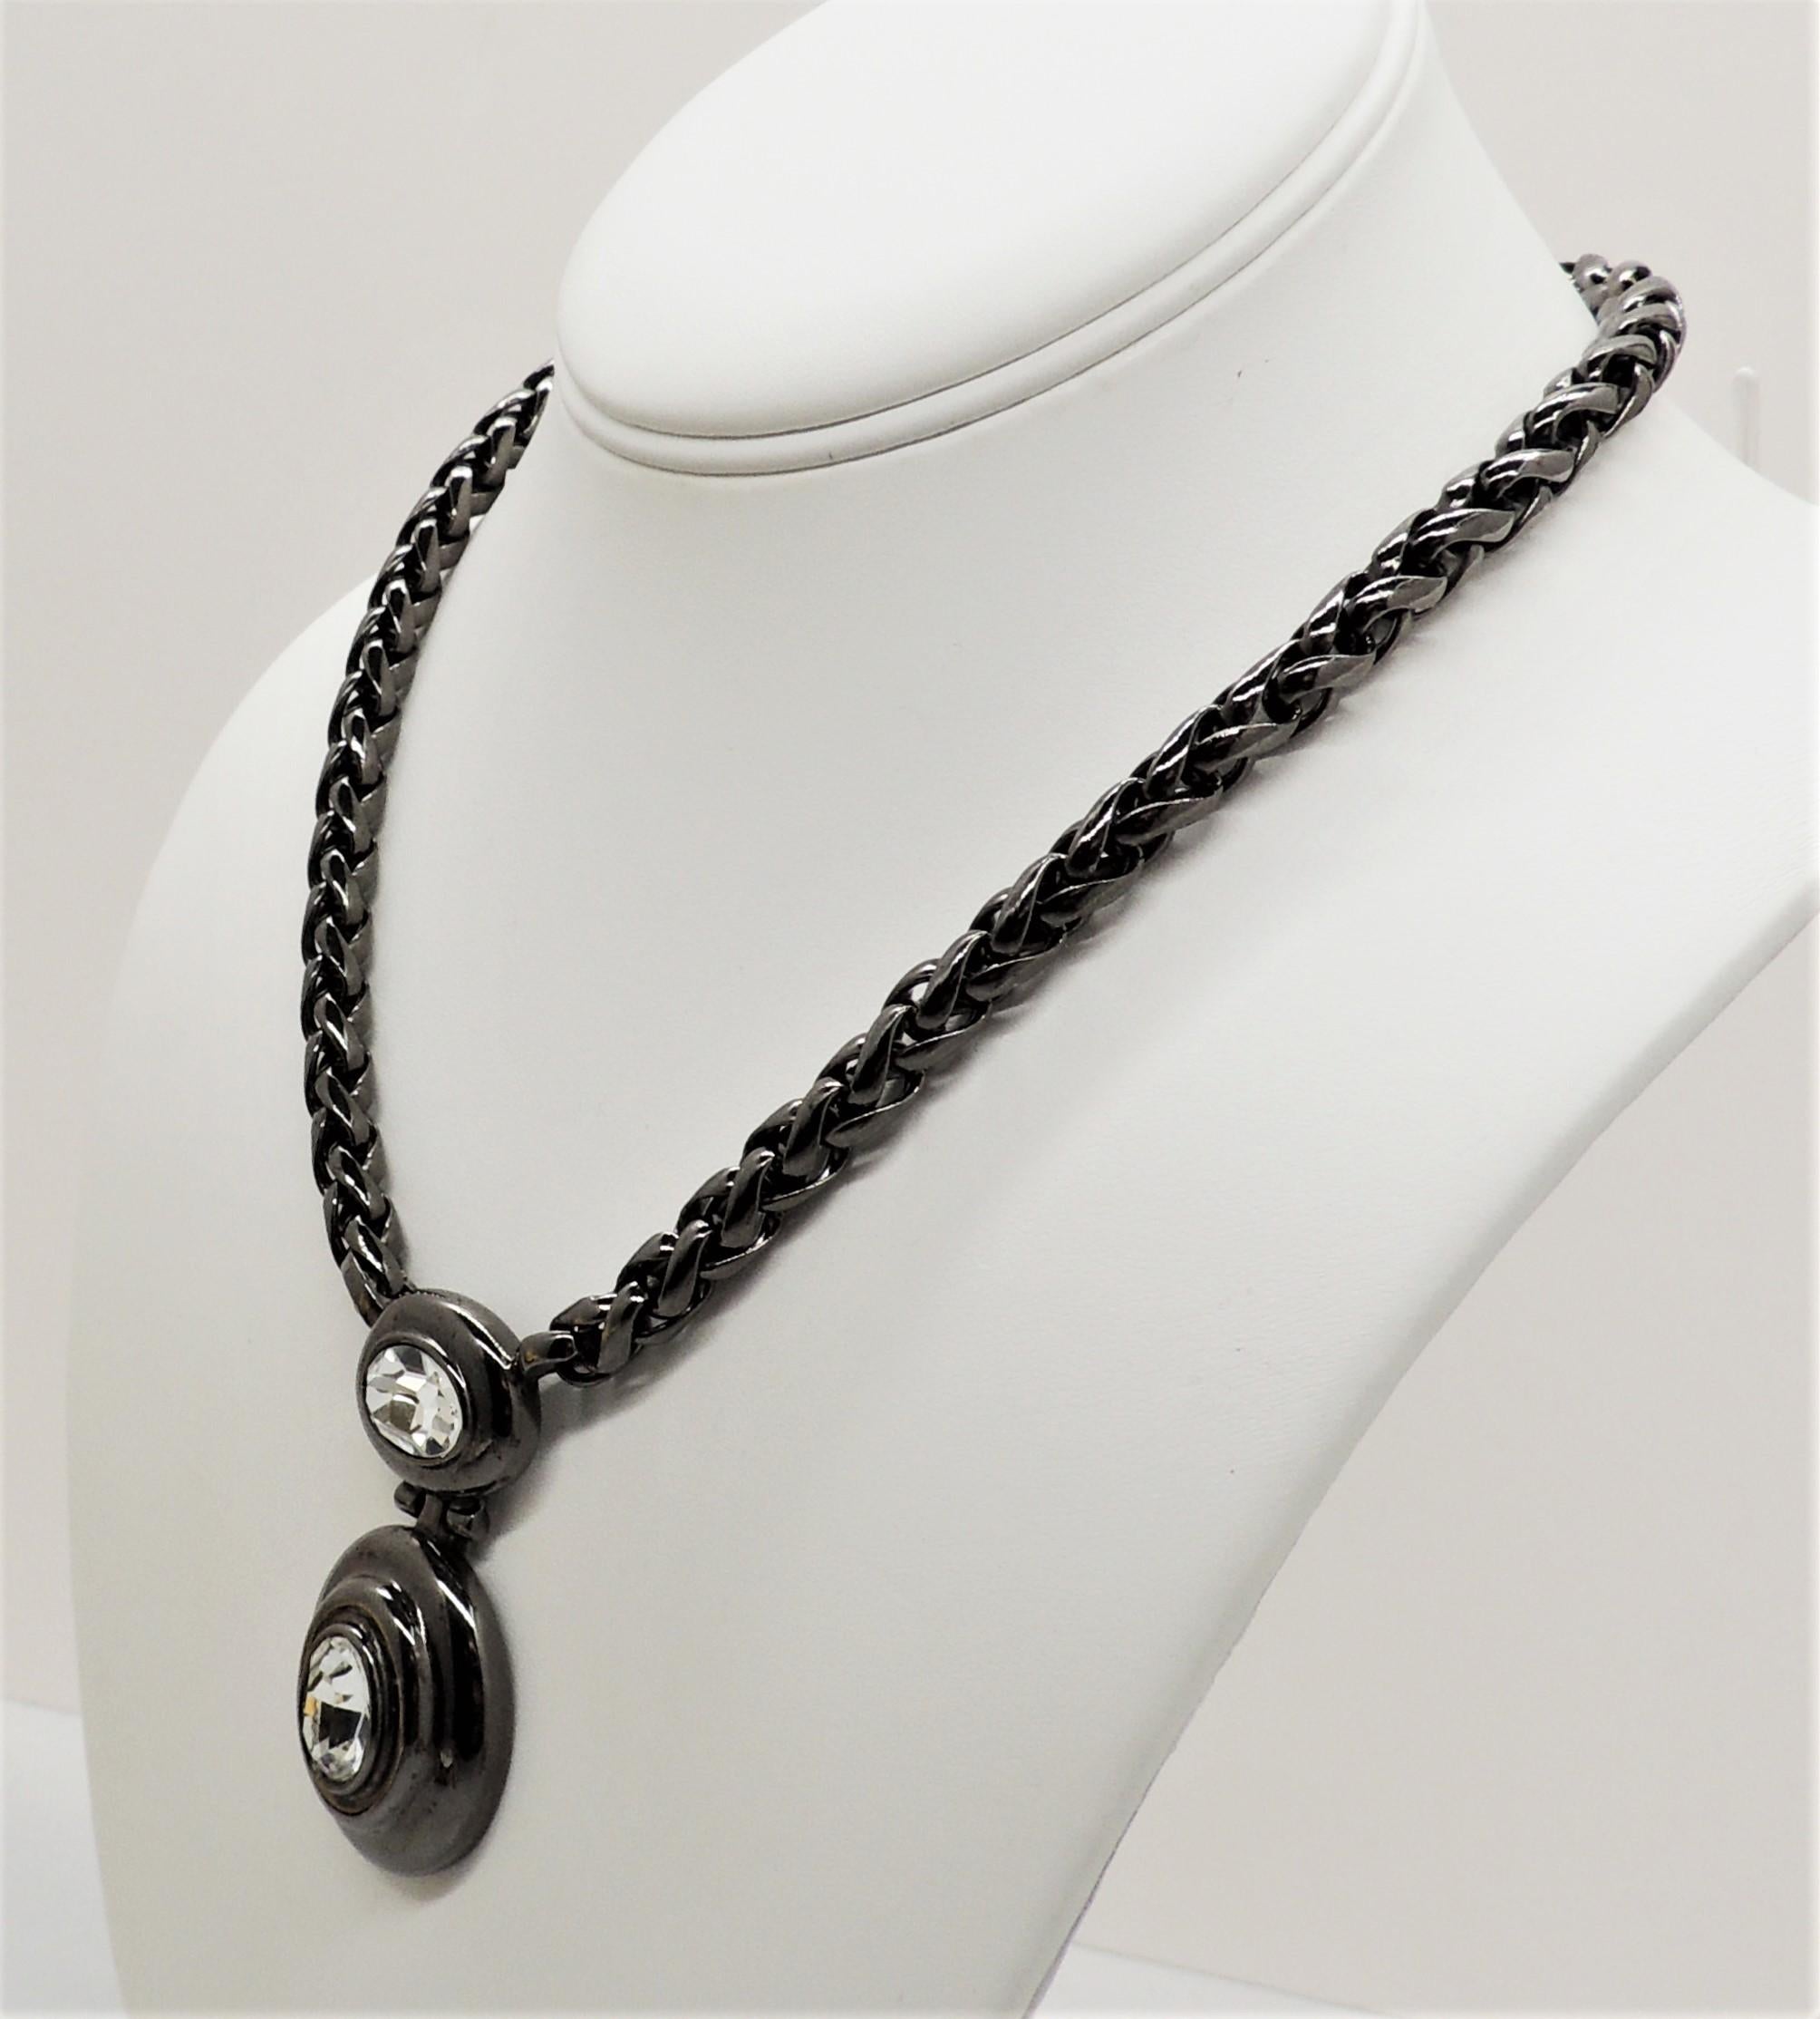 Vintage 1980s Signed Givenchy Hematite Finish Clear Rhinestone Pendant Necklace In Excellent Condition For Sale In Easton, PA